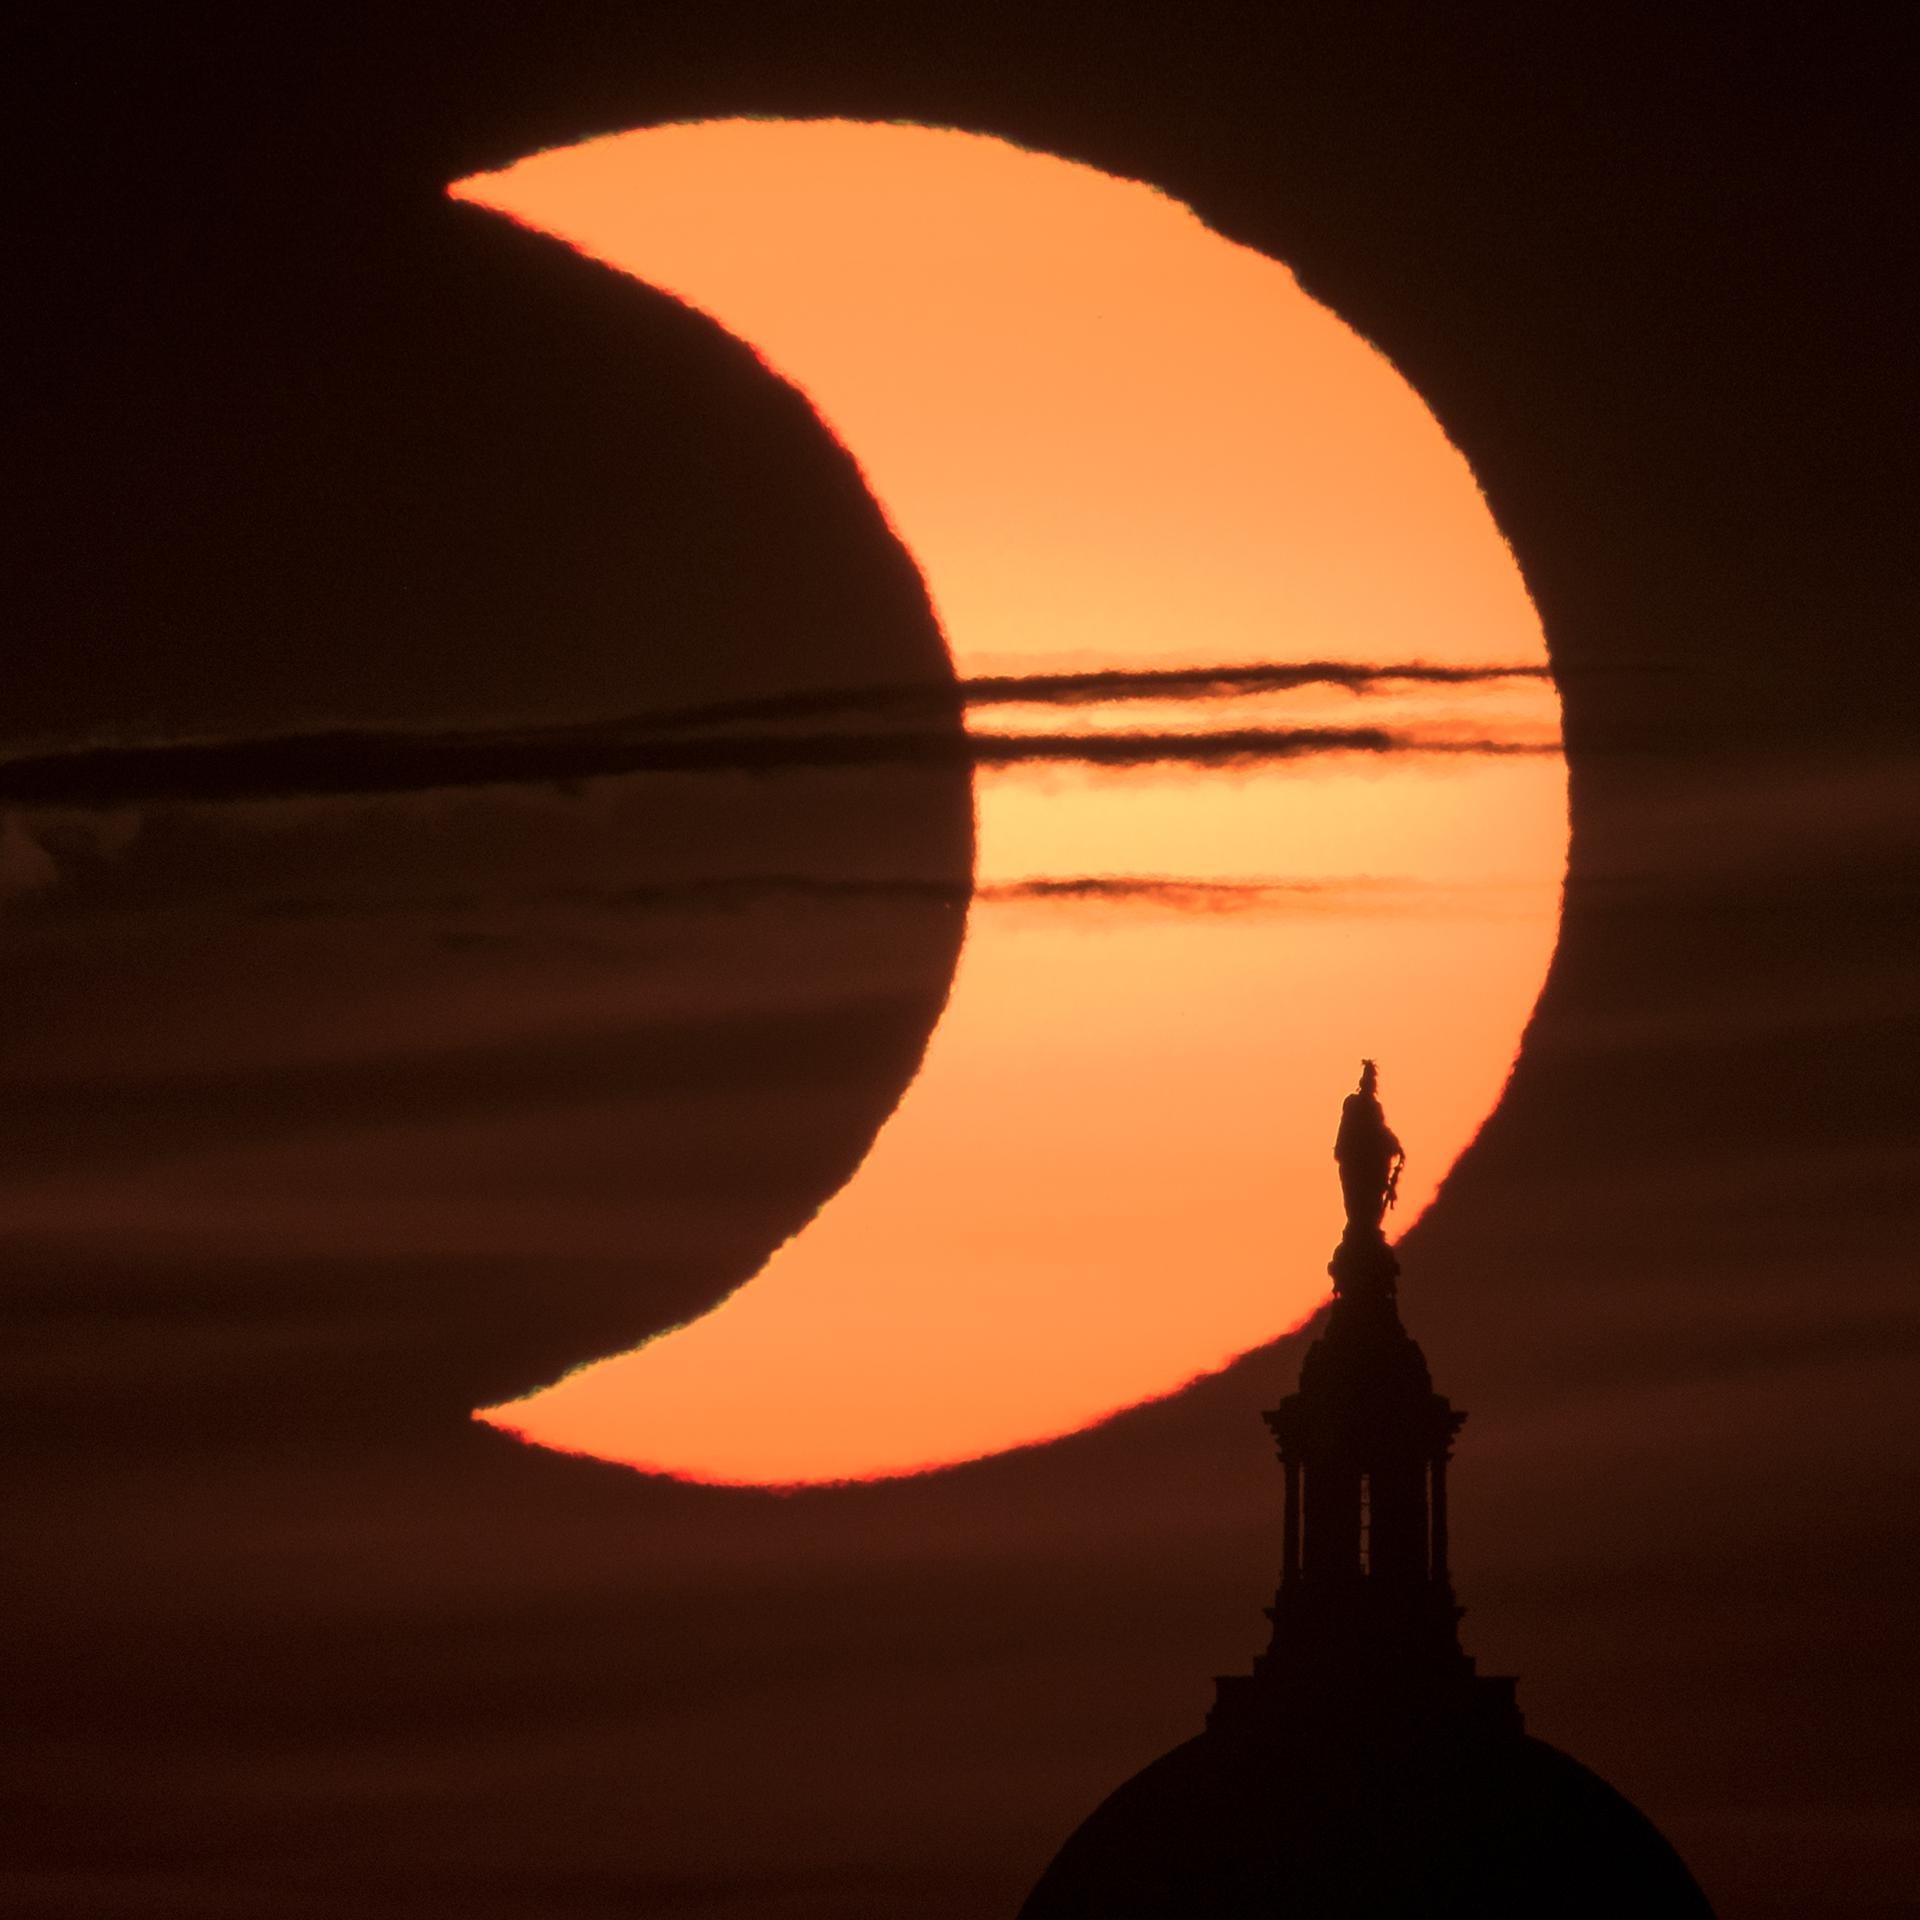 A partial solar eclipse is seen as the sun rises behind the Statue of Freedom atop the United States Capitol Building, Thursday, June 10, 2021, as seen from Arlington, Virginia. Credit: NASA/Bill Ingalls